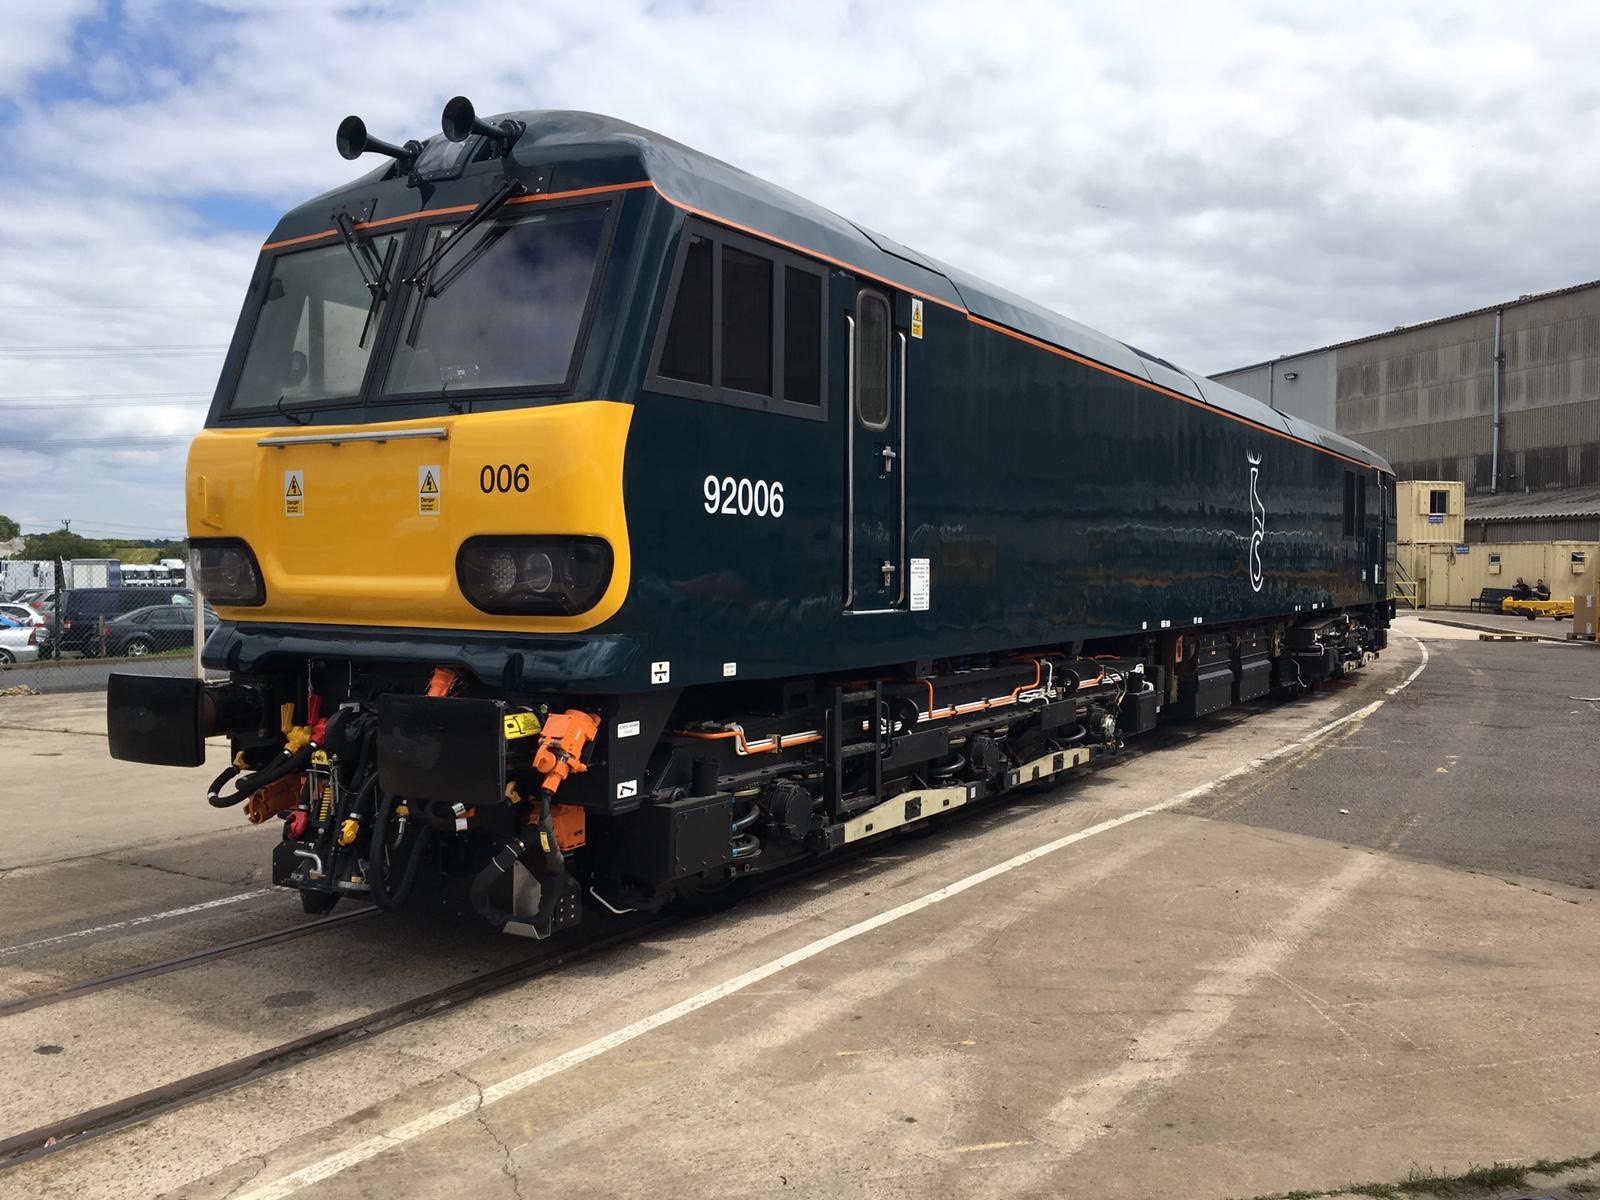 GBRf’s £2 Million Refurbished Class 92 to Enter Caledonian Sleeper Service